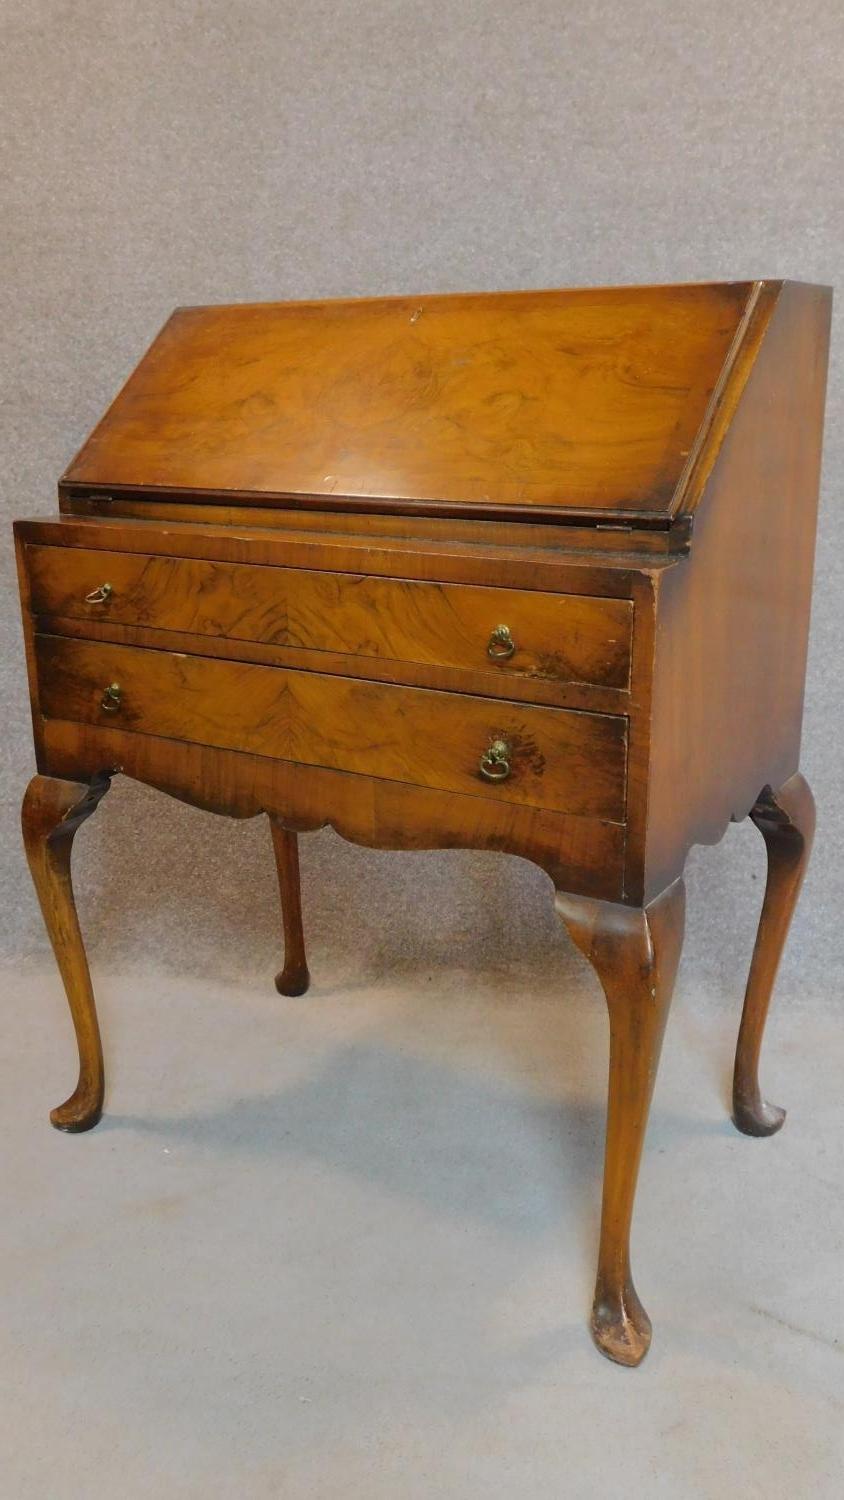 A mid Georgian style burr walnut bureau with fall front enclosing a fitted interior on cabriole - Image 4 of 4